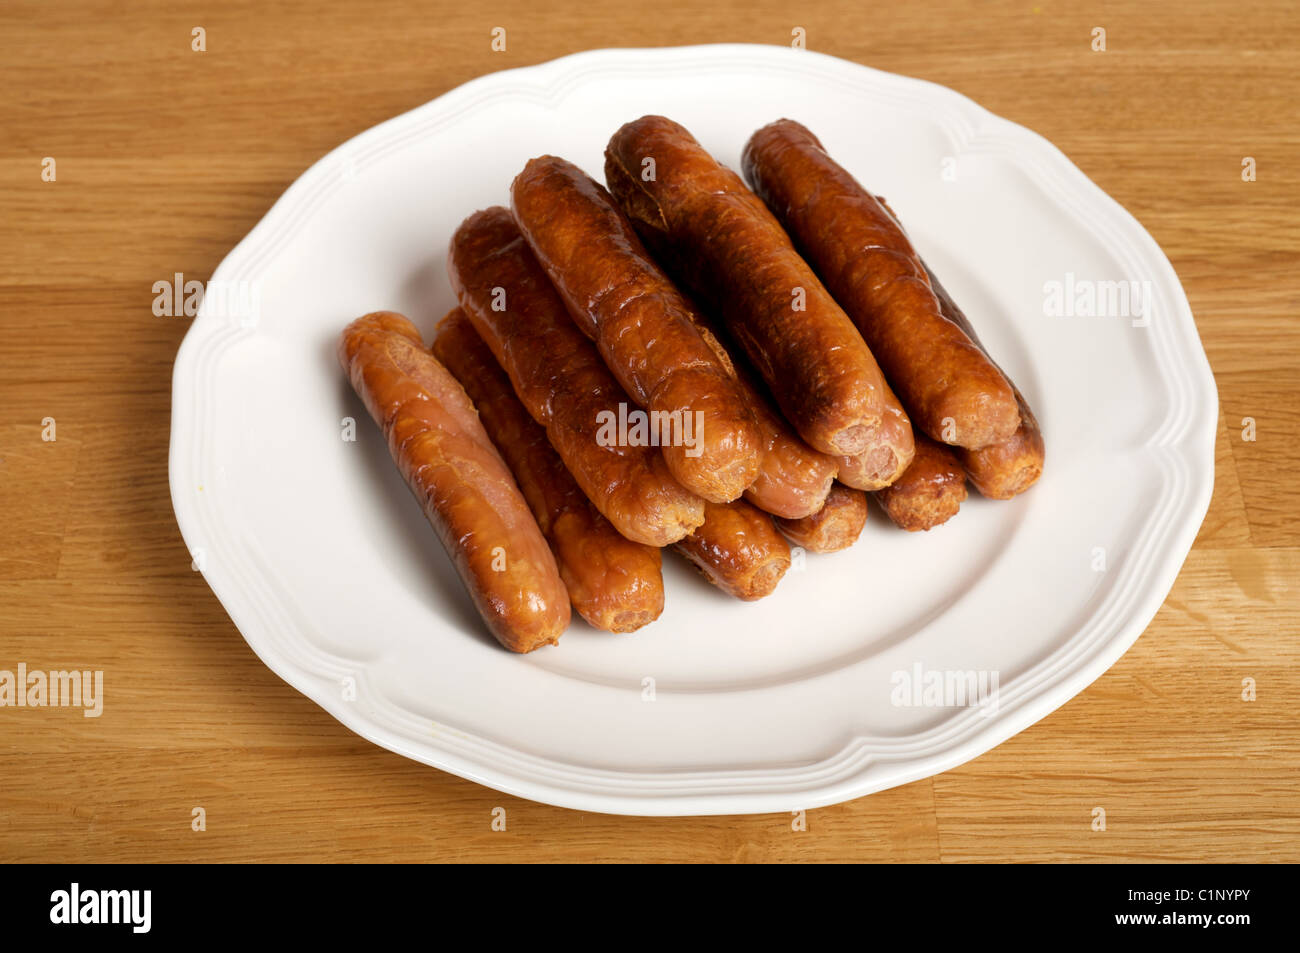 Plate of grilled sausages Stock Photo